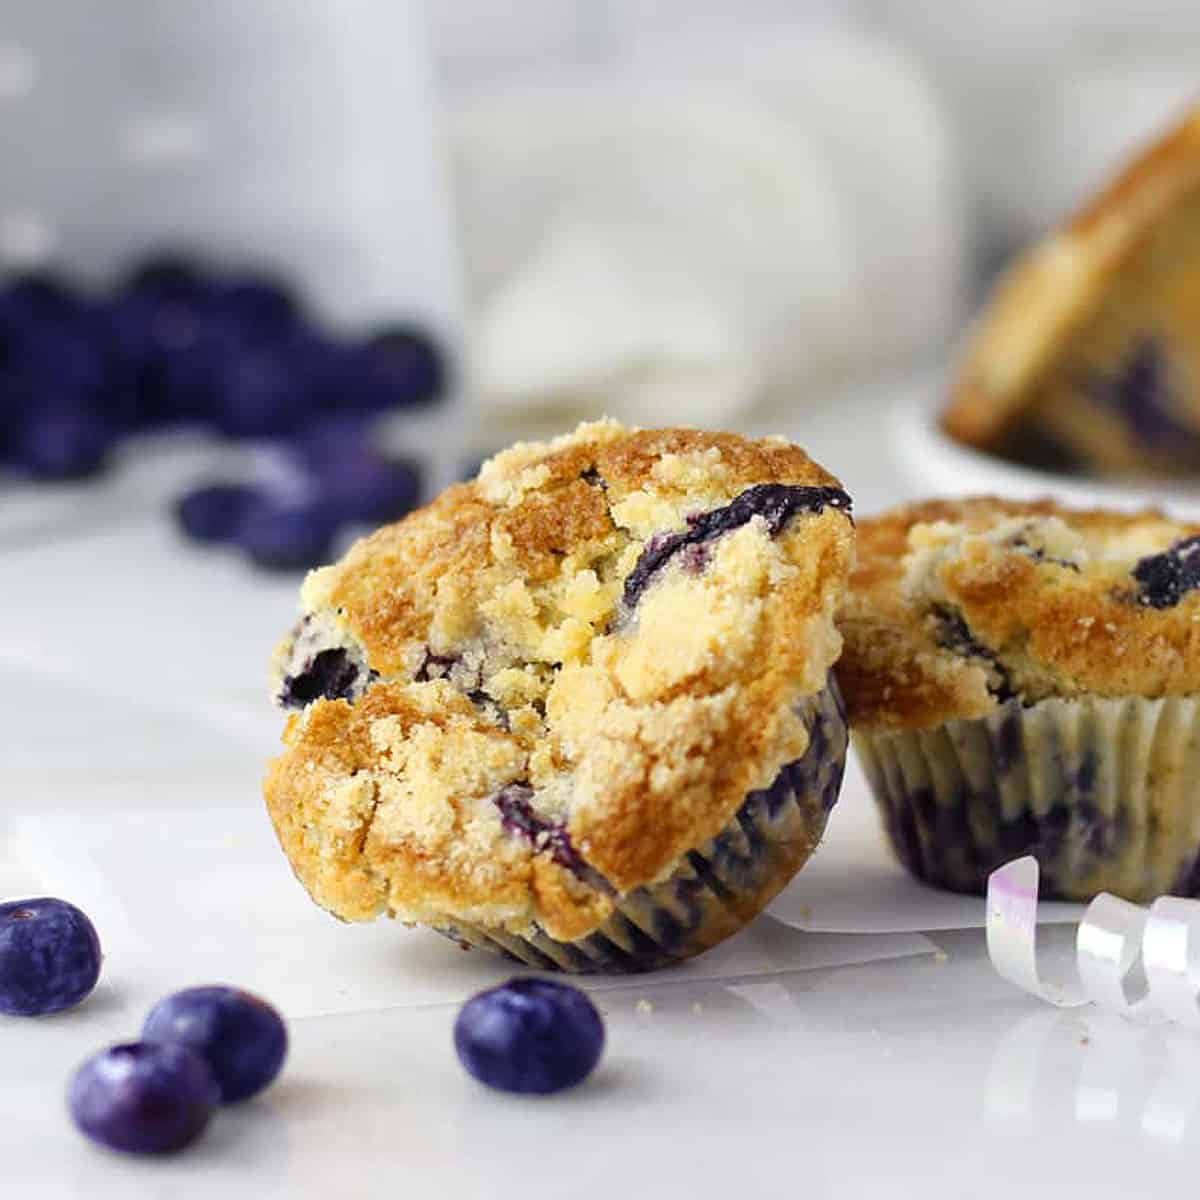 a blueberry muffin leaning on another blueberry muffin